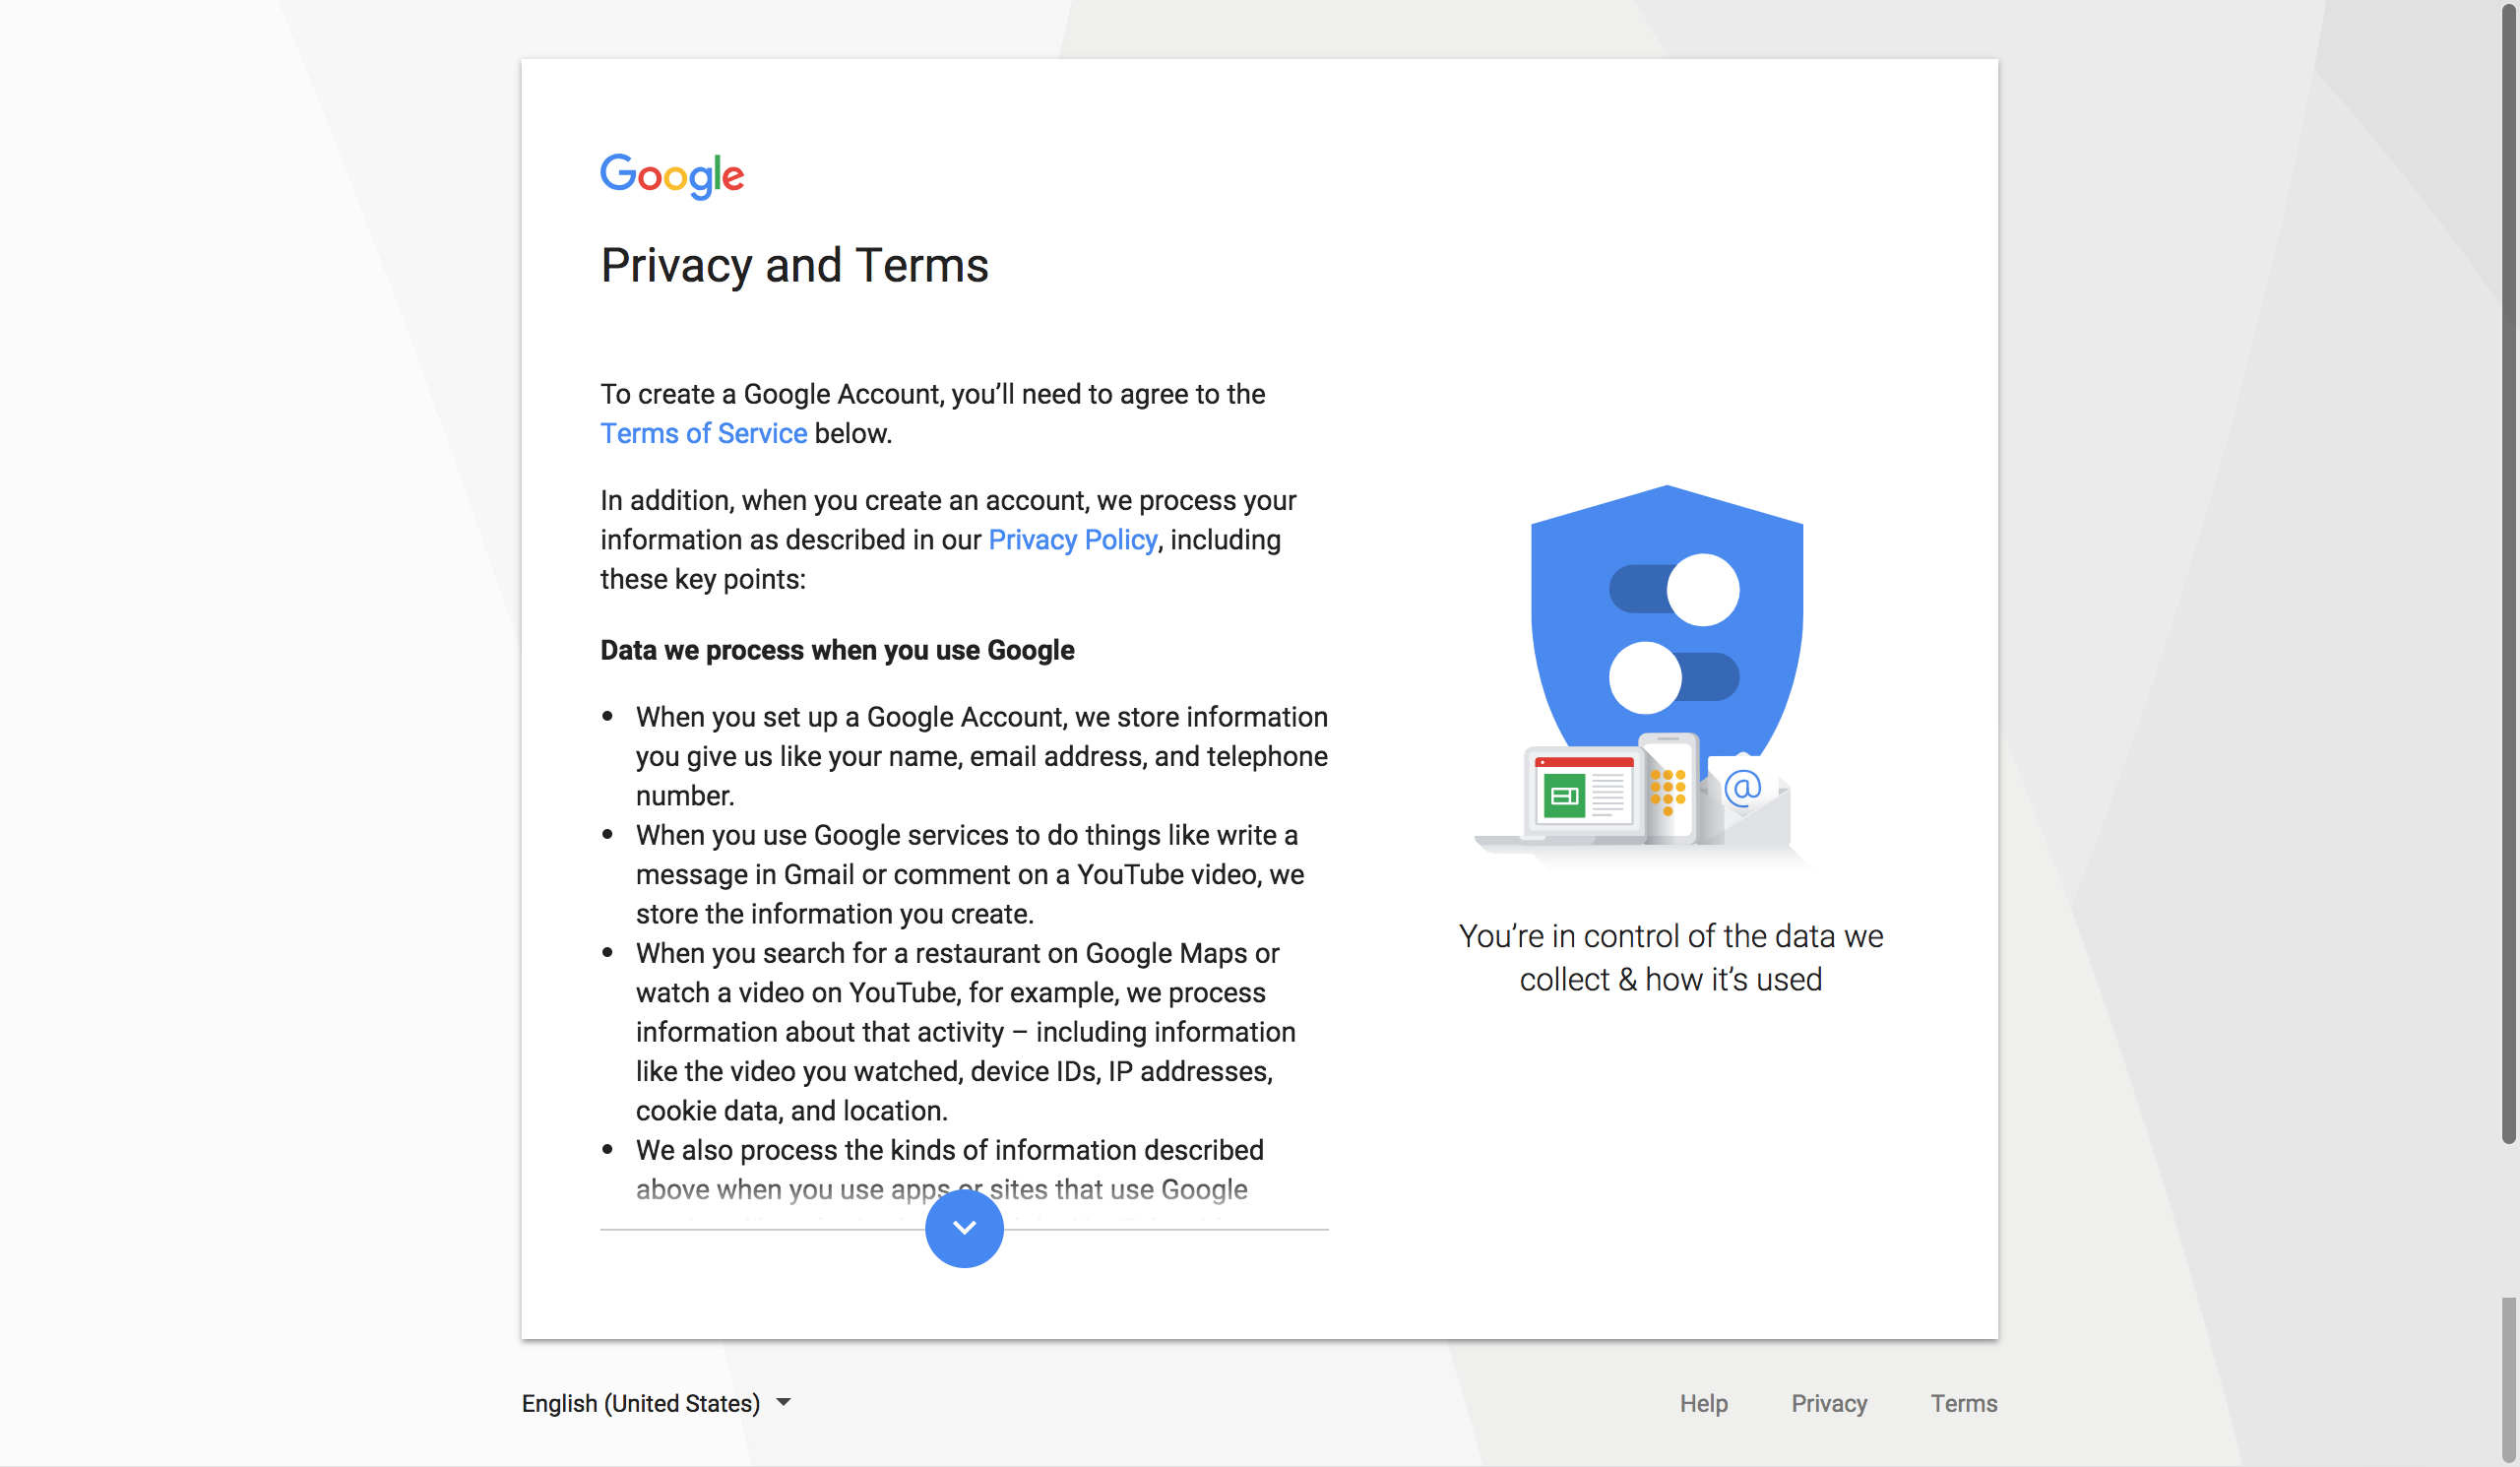 Top of the Privacy and Terms page